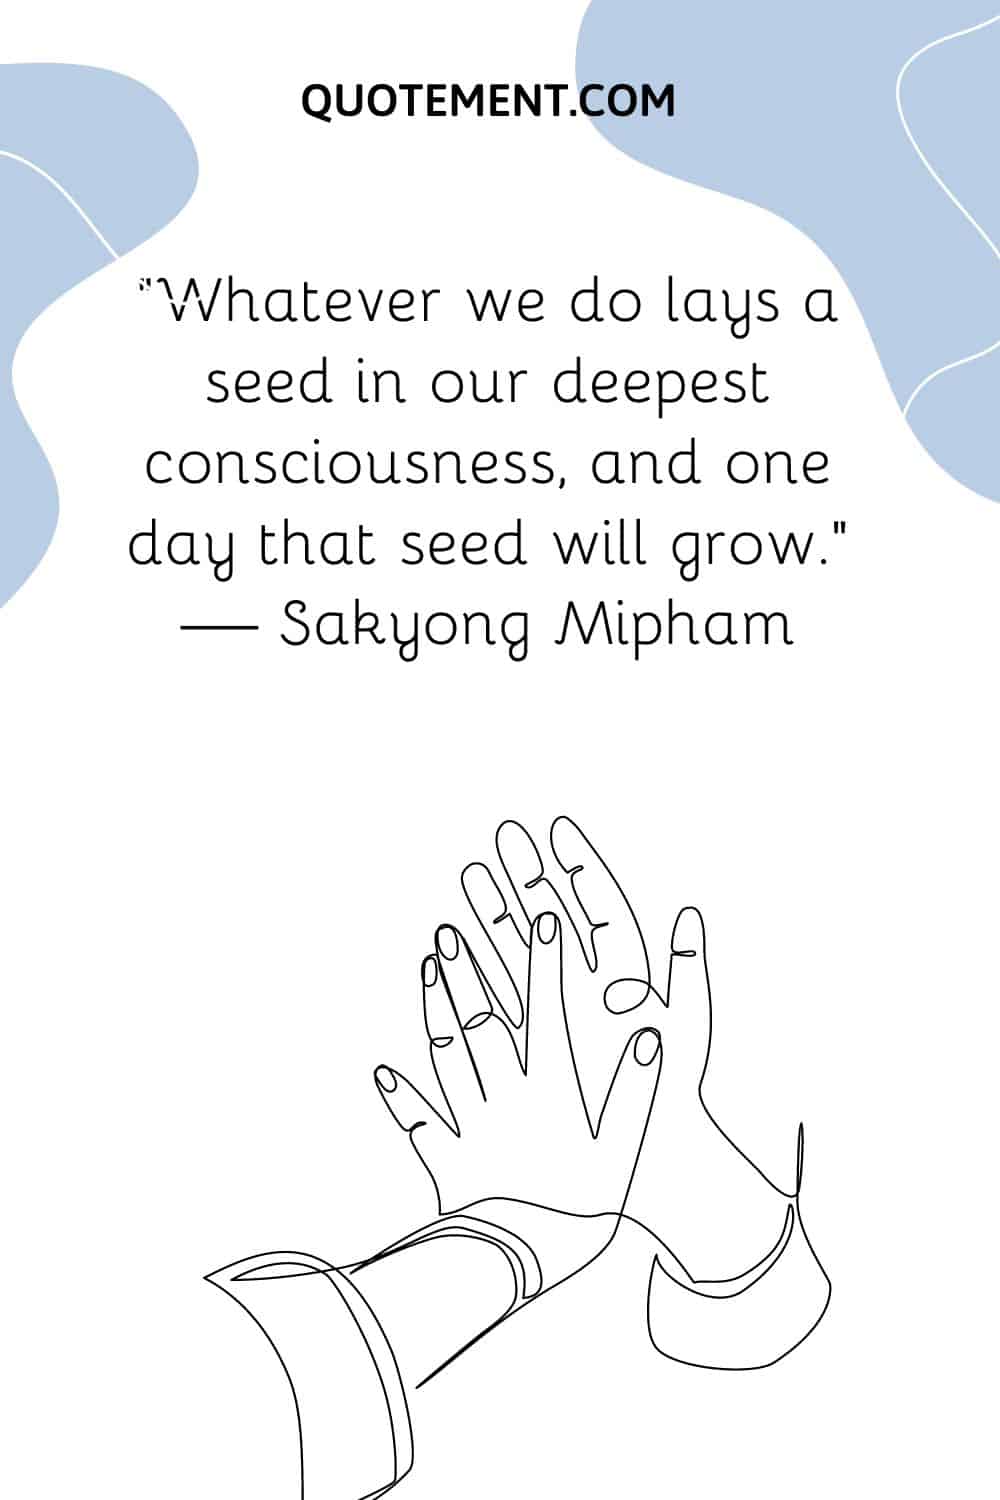 Whatever we do lays a seed in our deepest consciousness, and one day that seed will grow